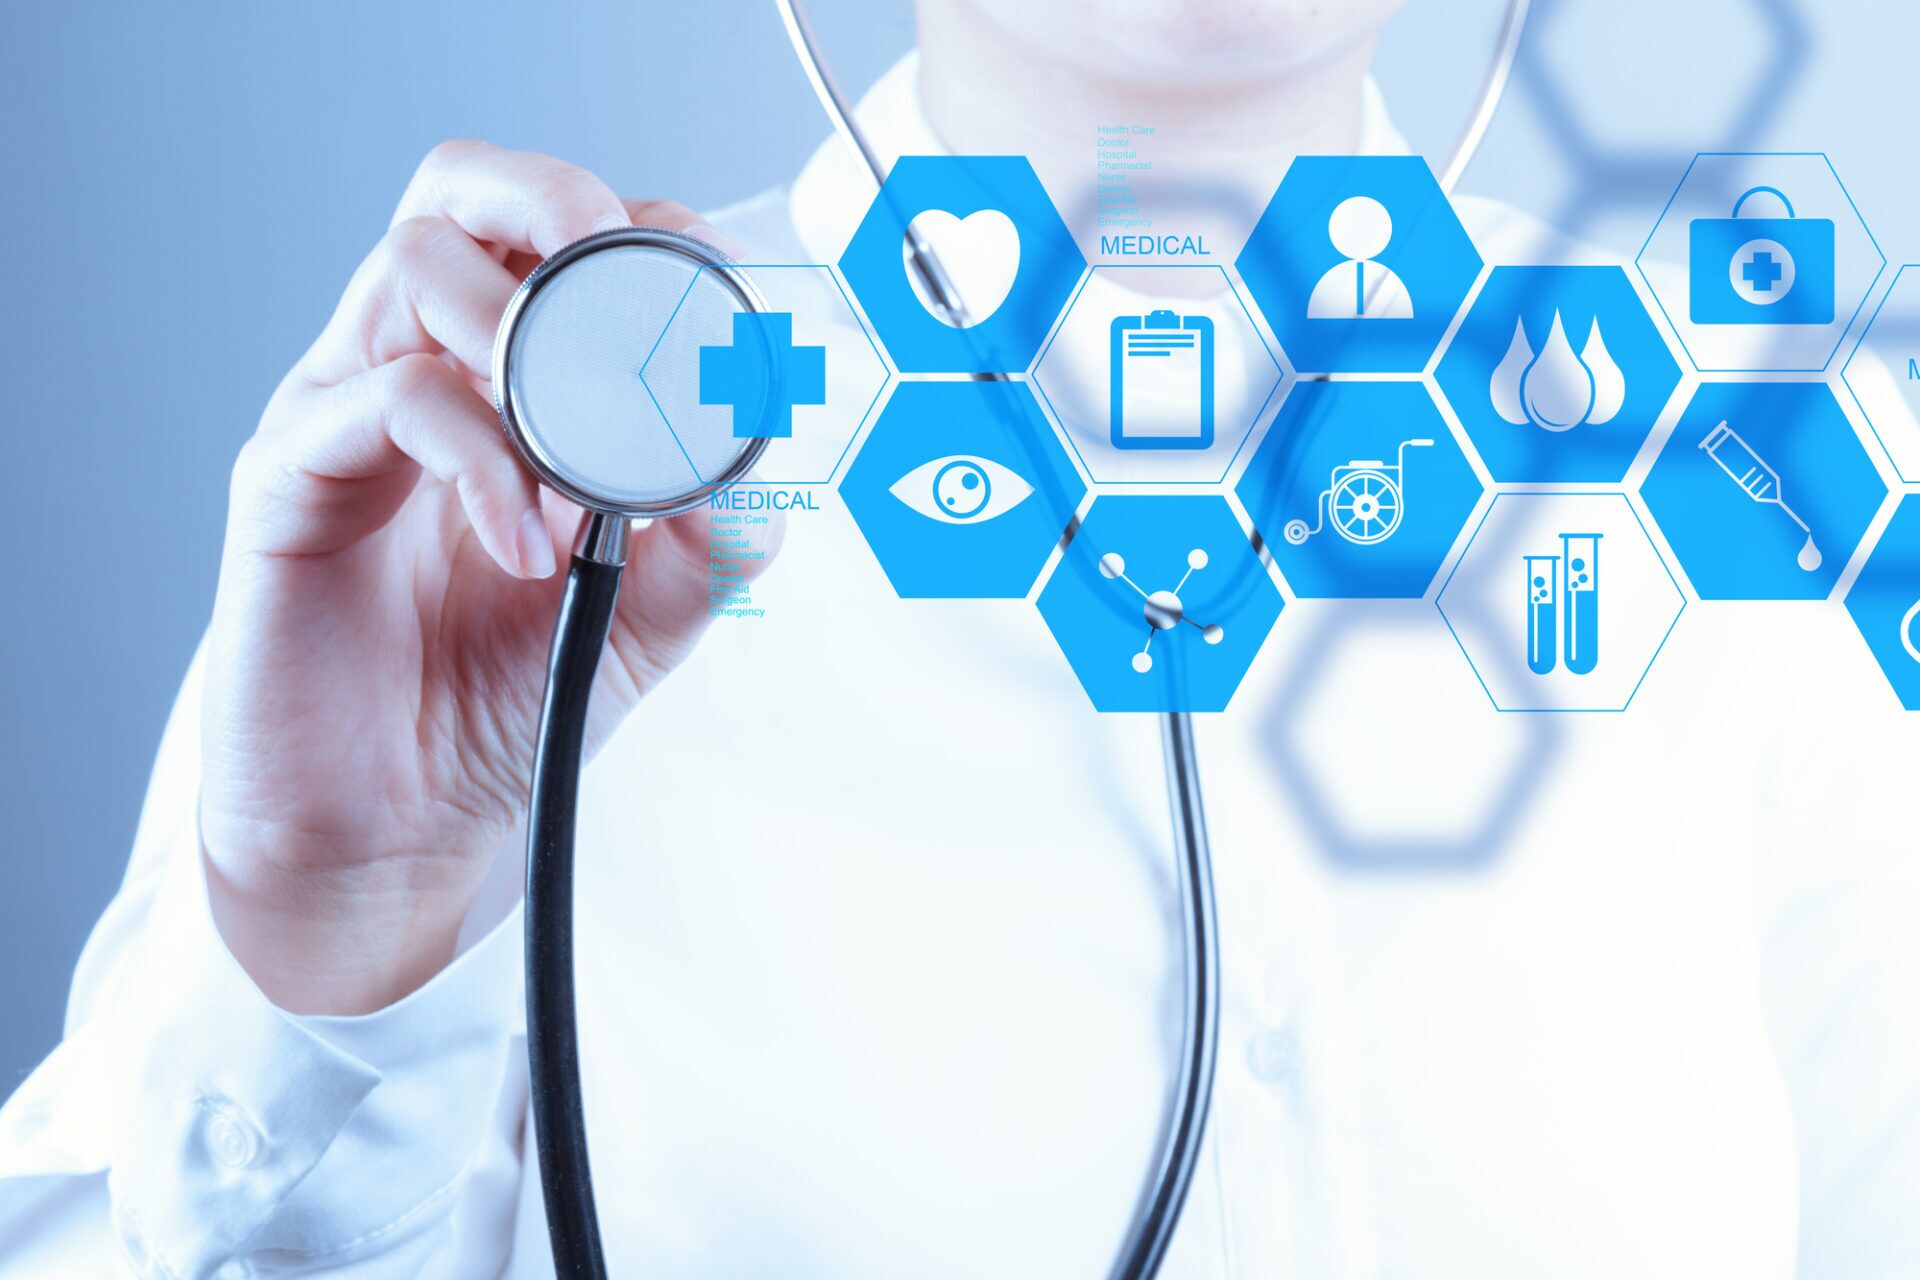 digital patient engagement solutions for healthcare organizations